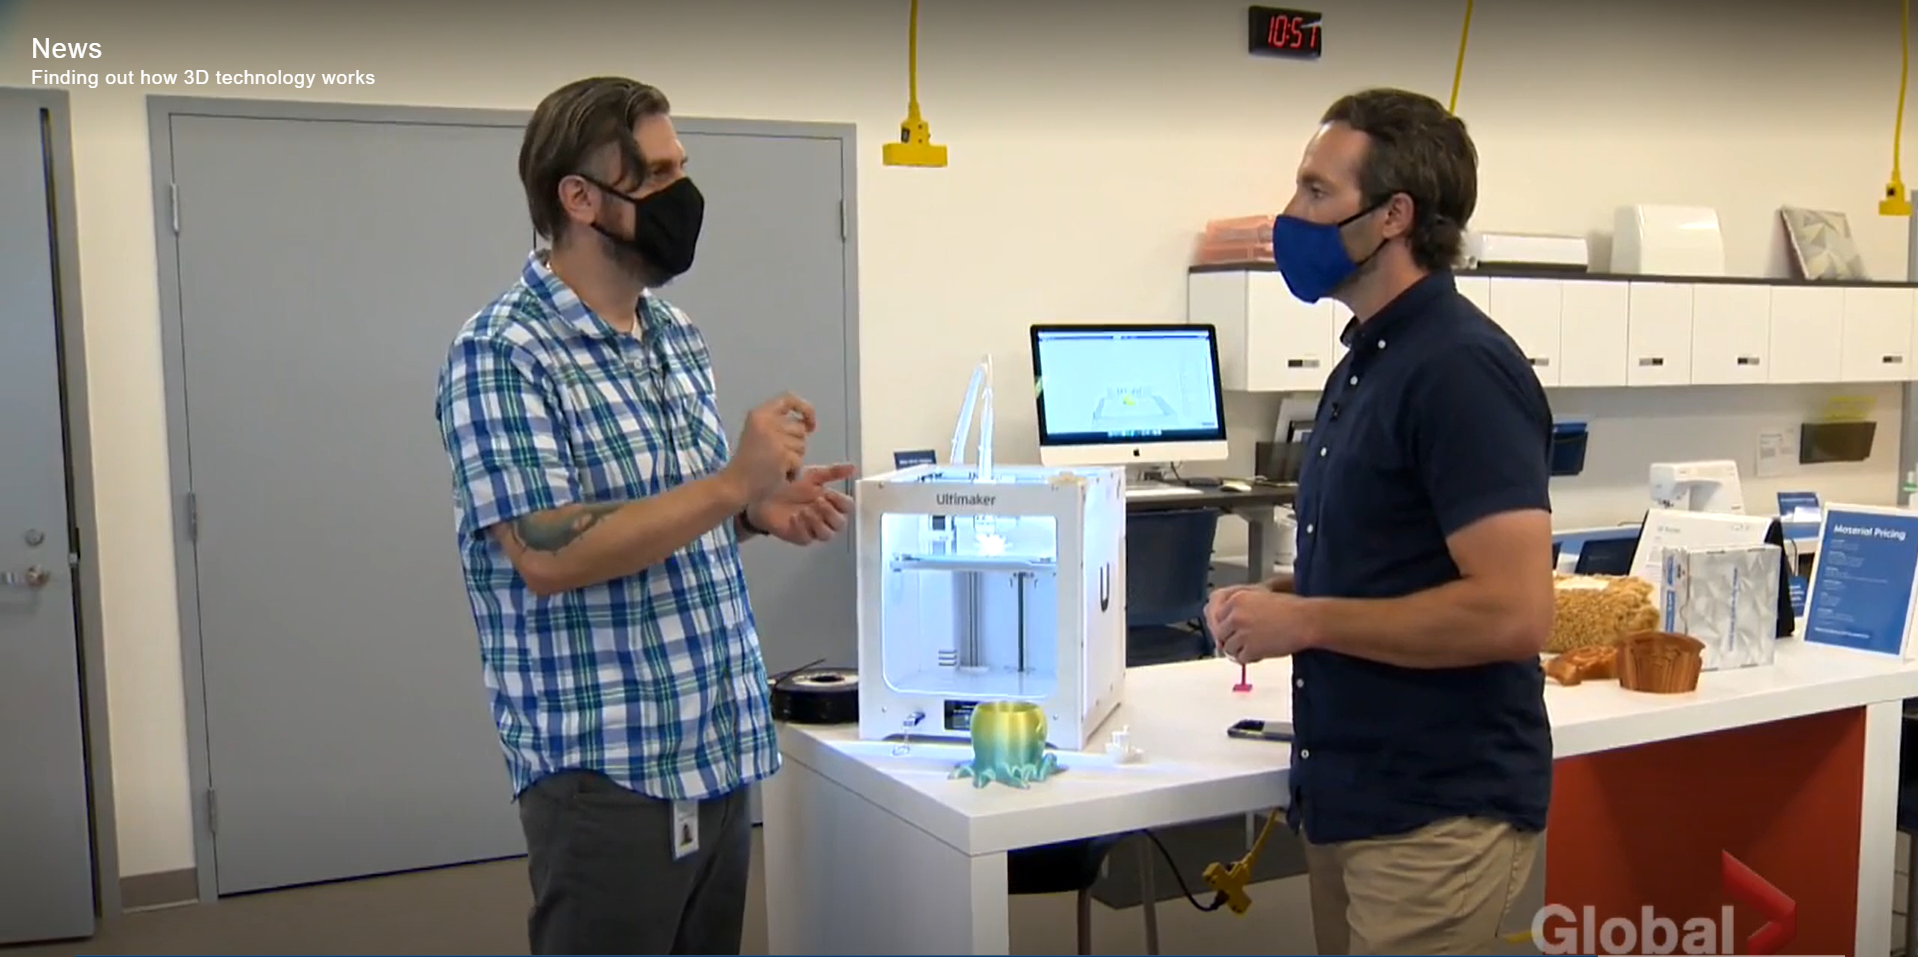 Global News visits the Glen Abbey Creation Zone to learn more about 3D printing  main image